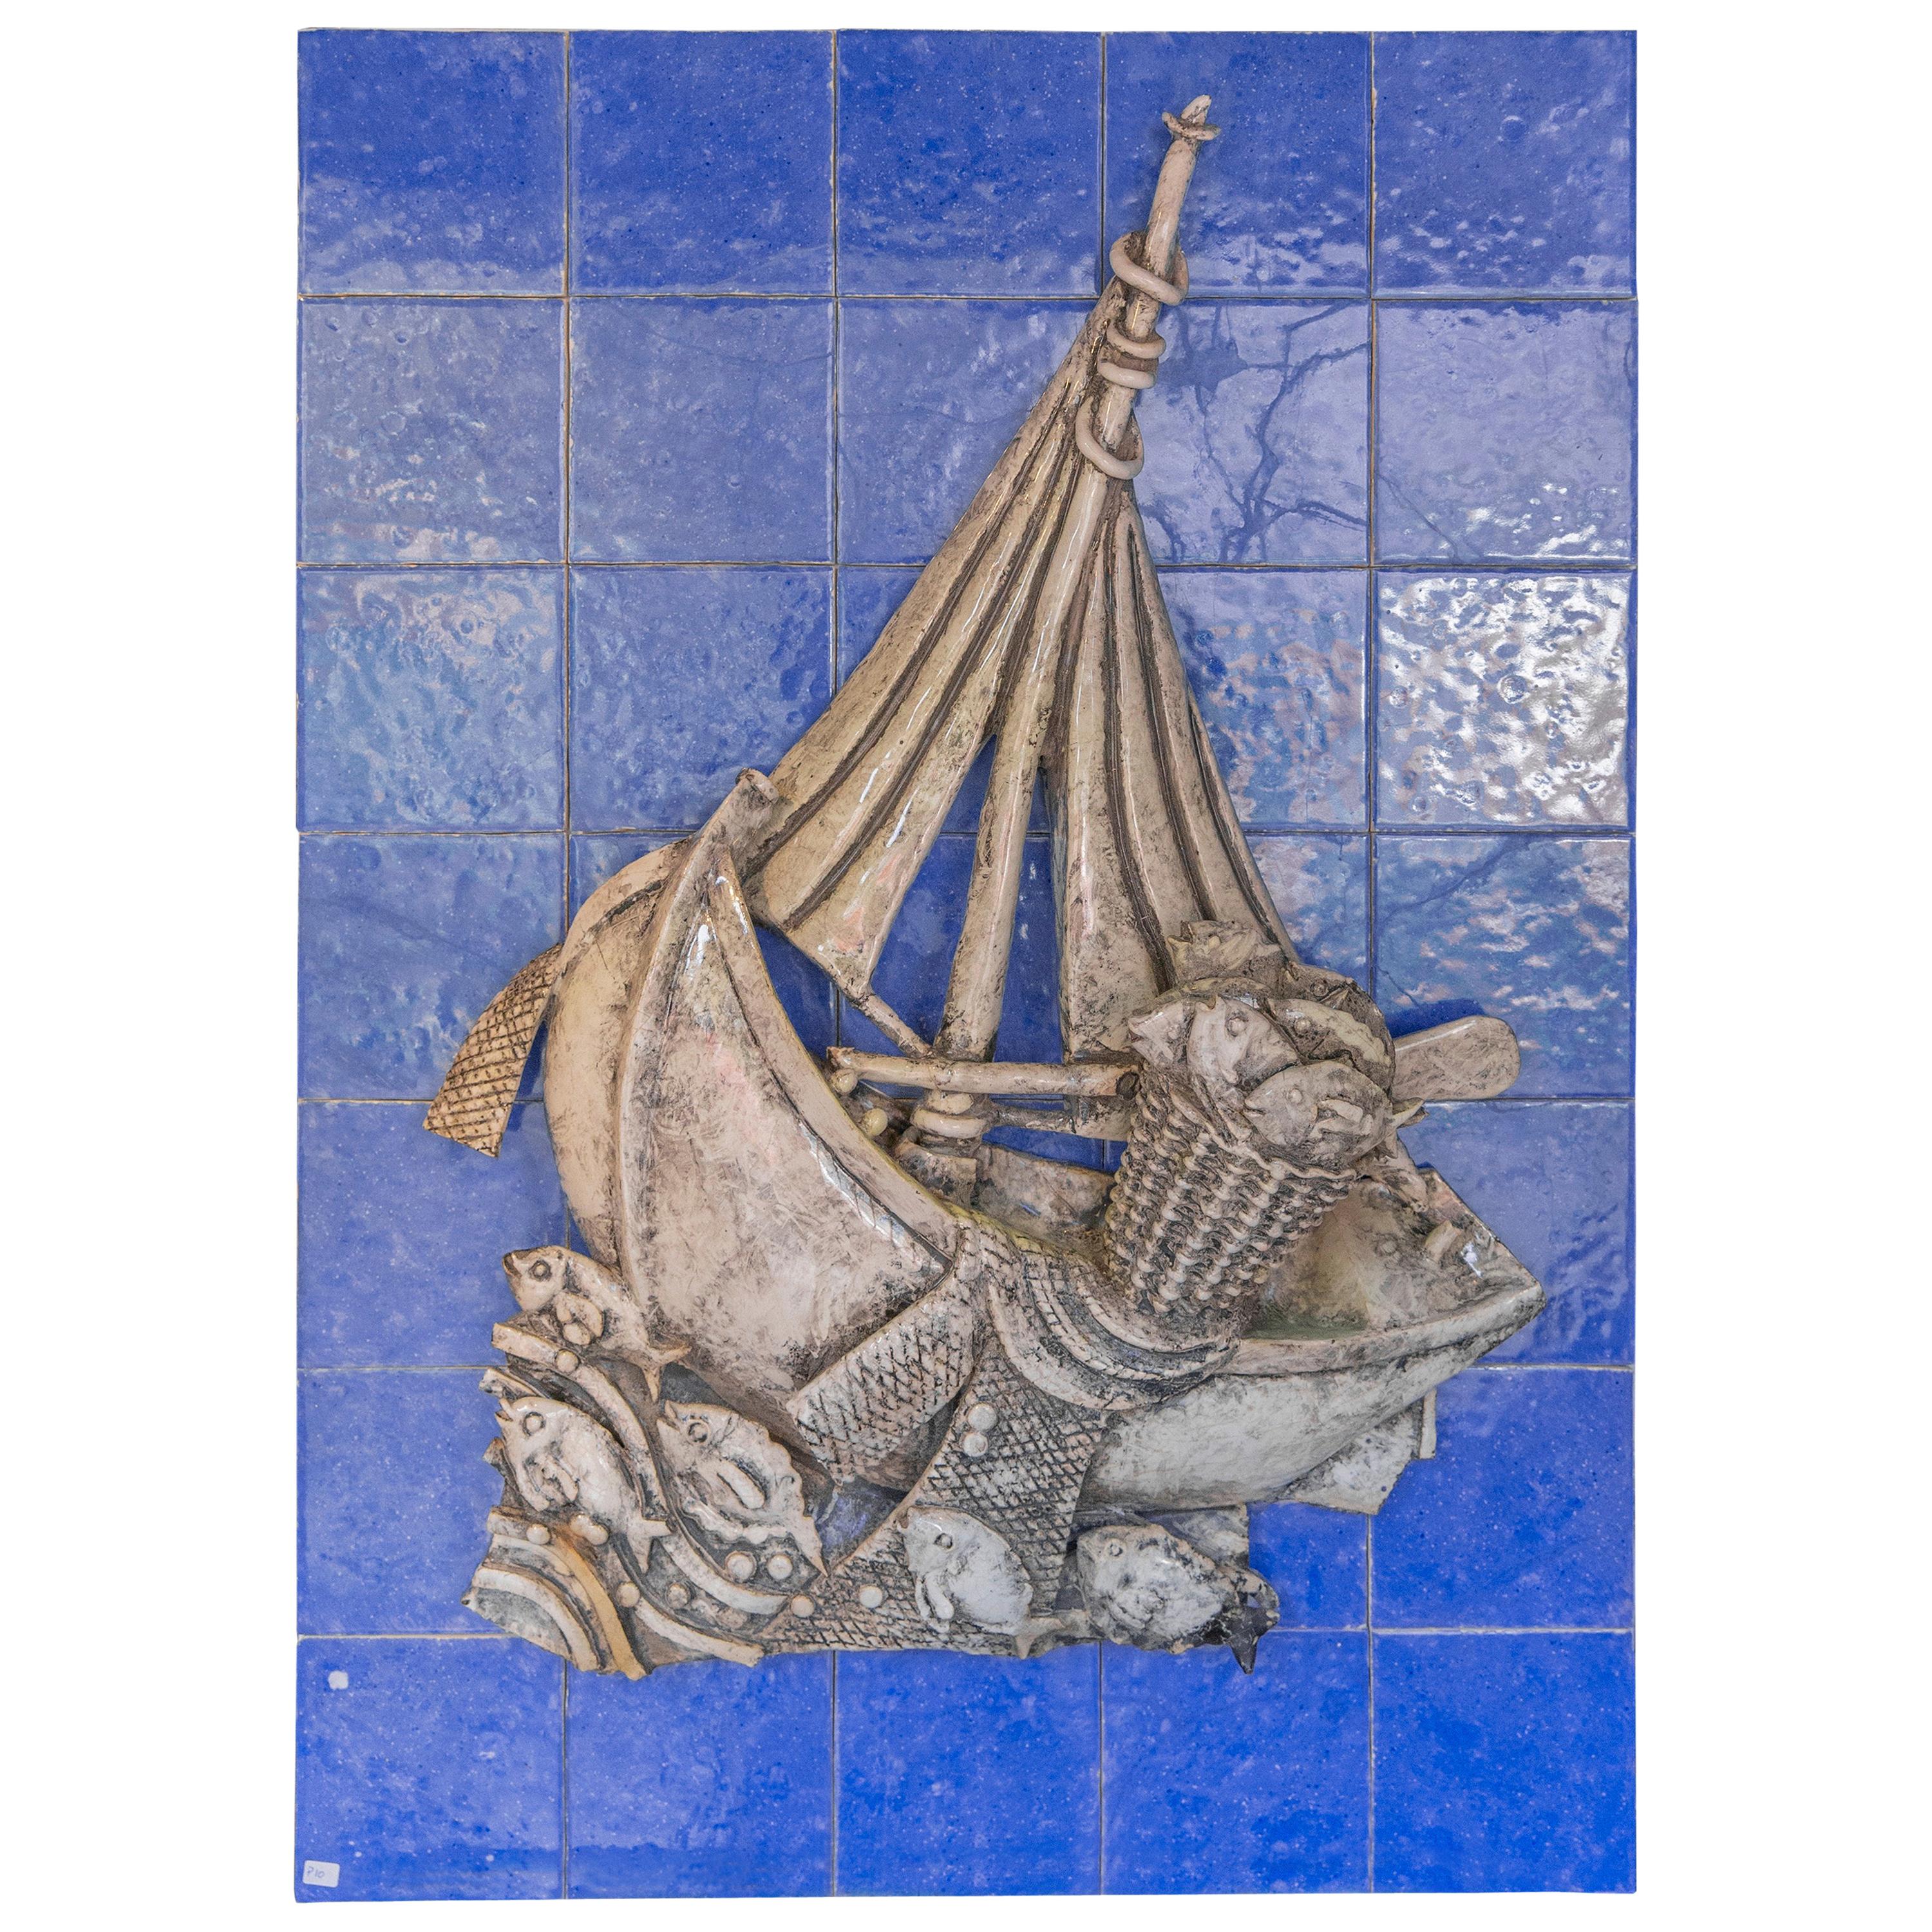 20th Century Tile Mural with Boat Attributed to Jorge Barradas For Sale